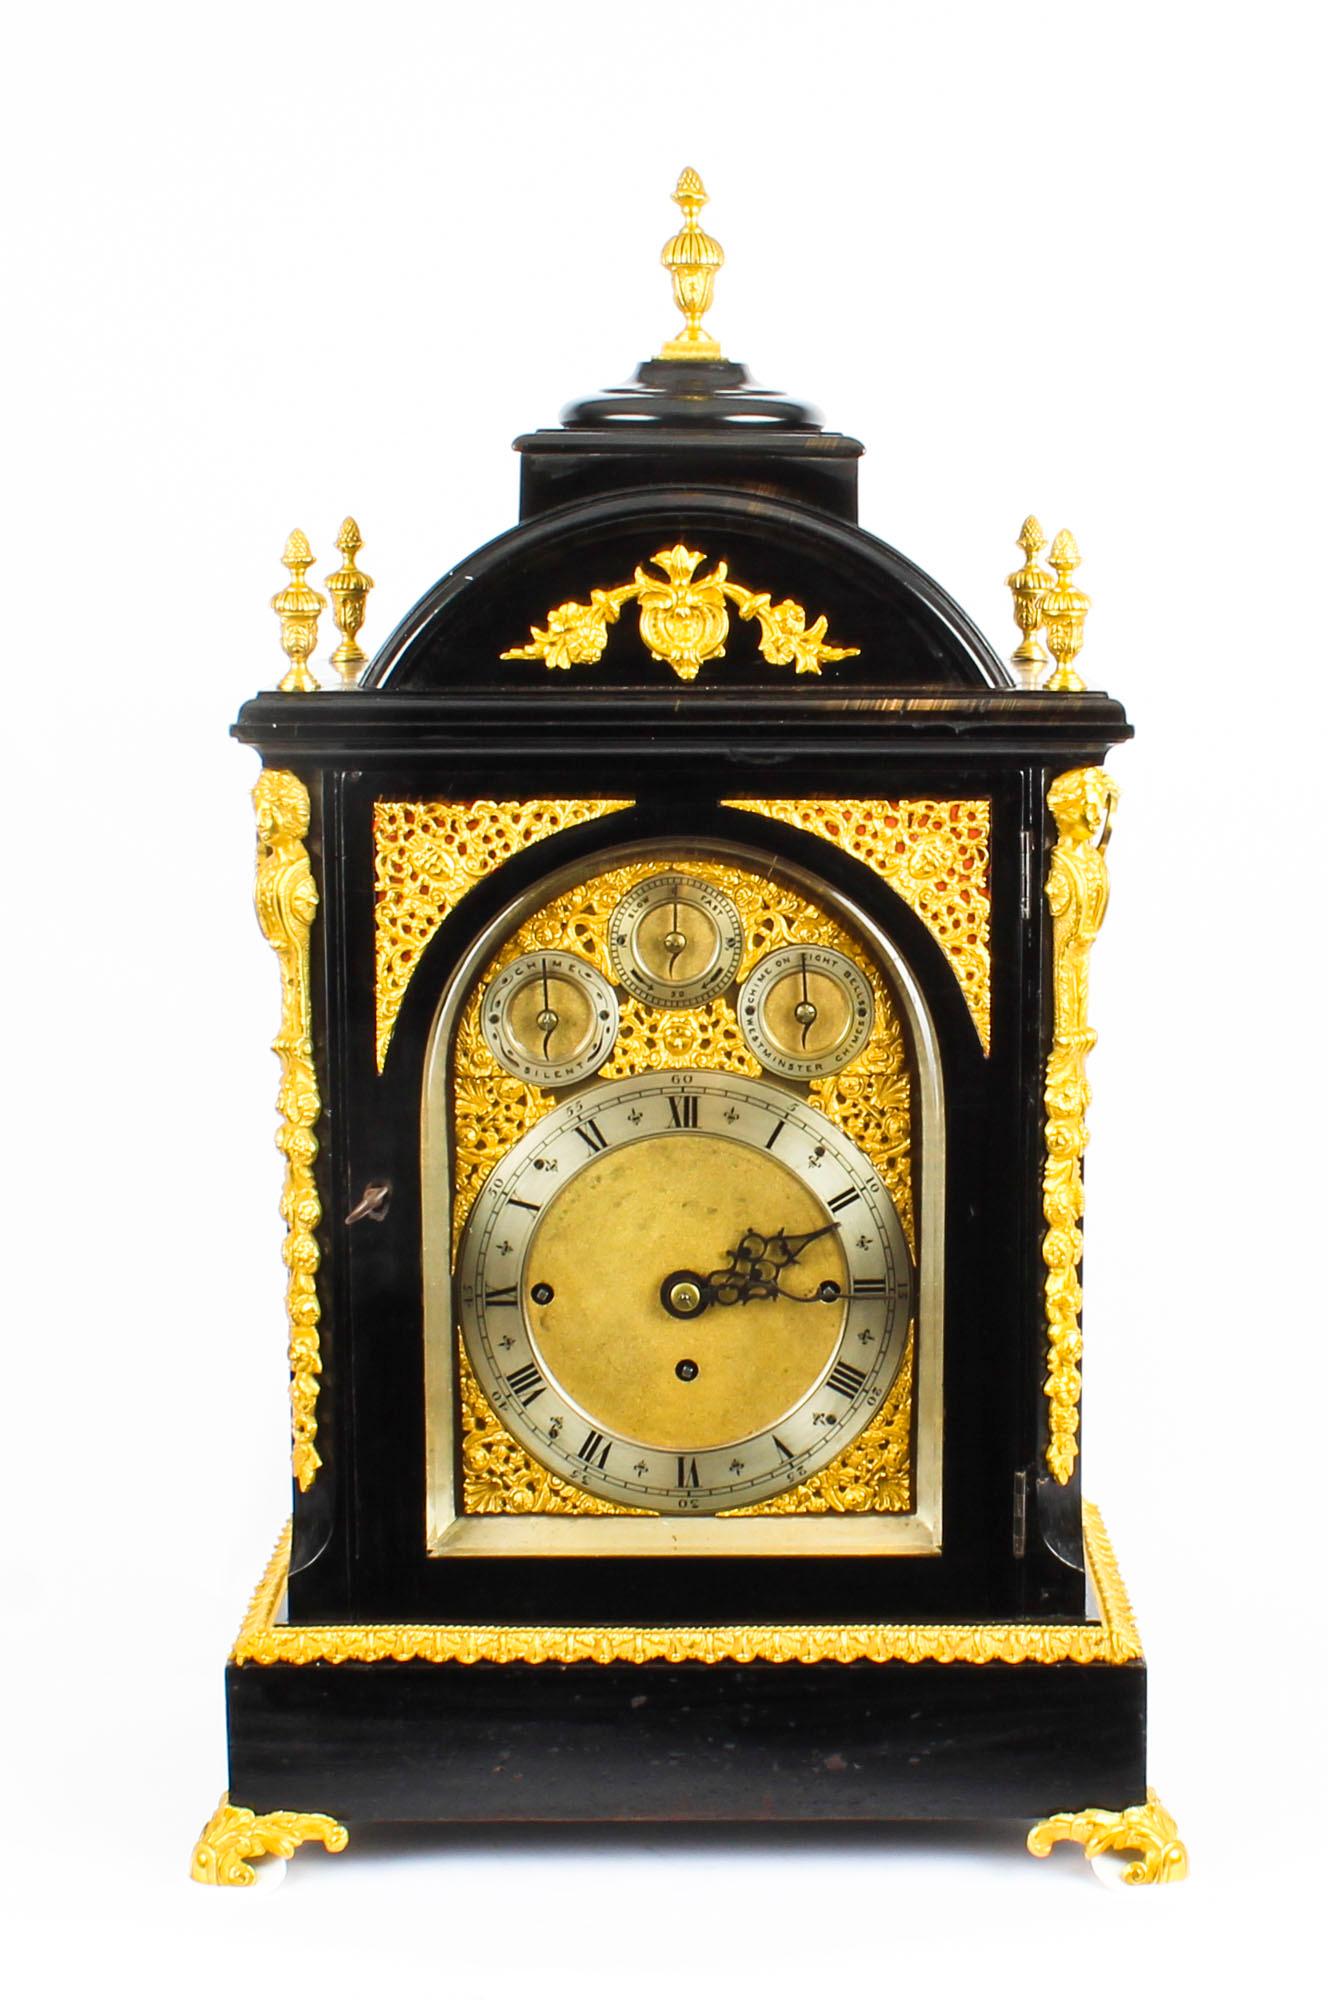 A stunning 19th century ormolu-mounted ebonised three train bracket clock, of large size. 

The caddy top case decorated with five flaming urn finials and ribbon-tied foliate festoons, above an arched cast brass glazed door. This is flanked by a